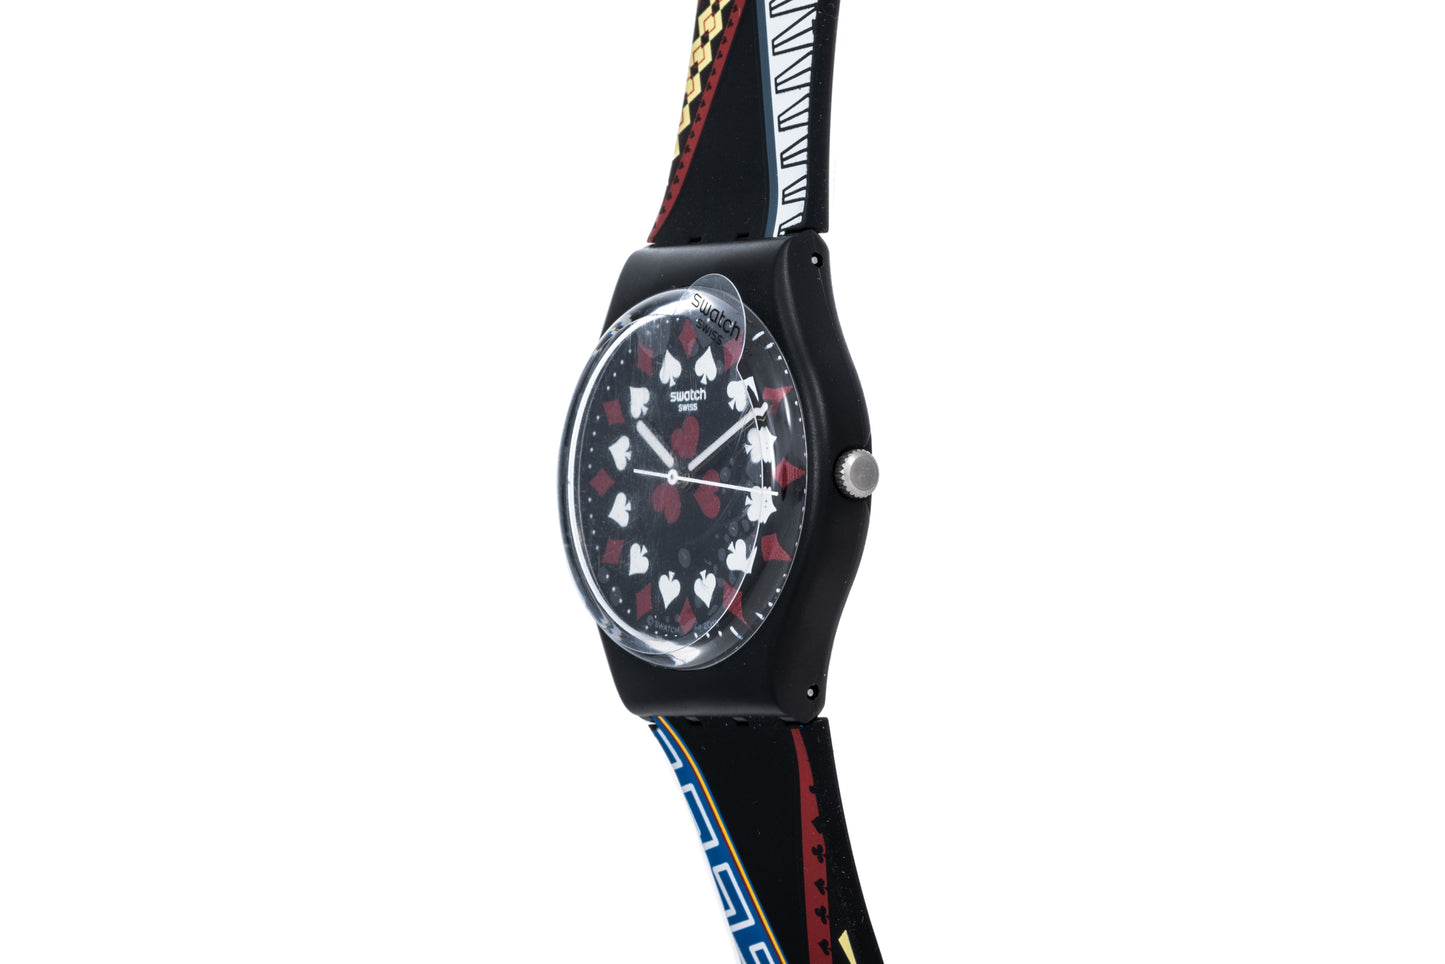 SWATCH Casino Royale 2020 James Bond Collection